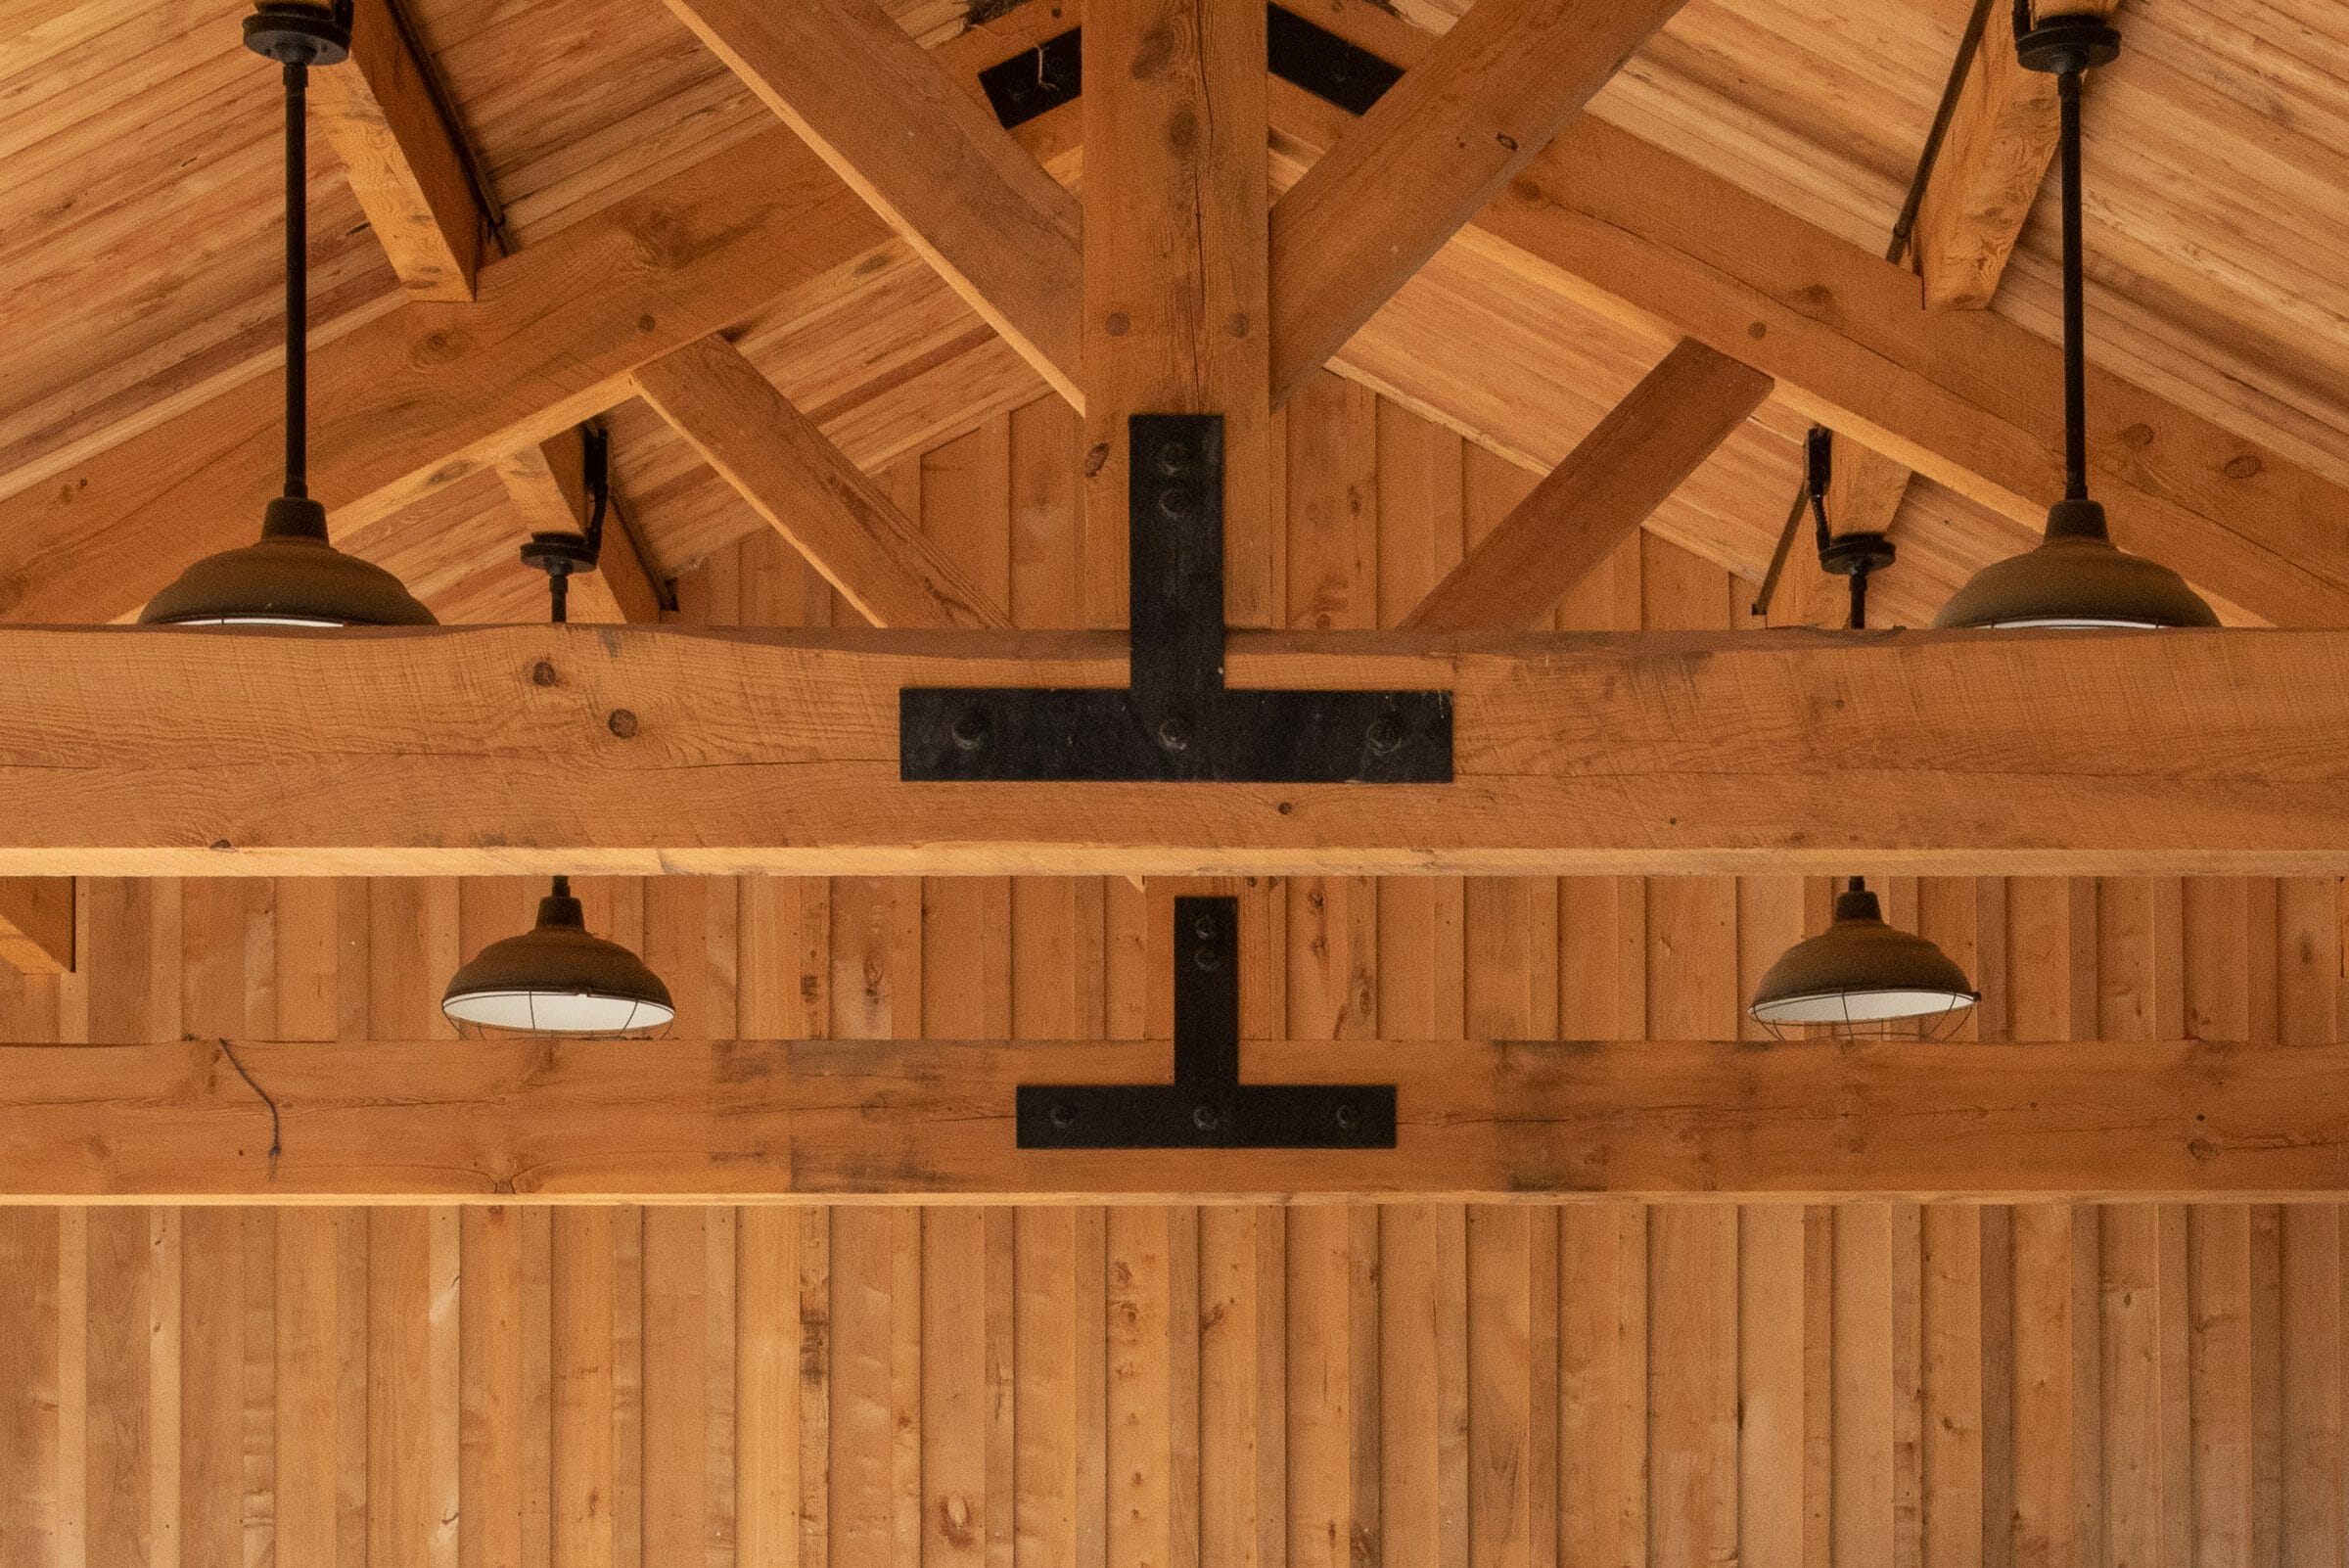 Timber Frame King Post Trusses with black steel plates in a pavilion at the Bechtel Summit home of the National Boy Scout Jamboree